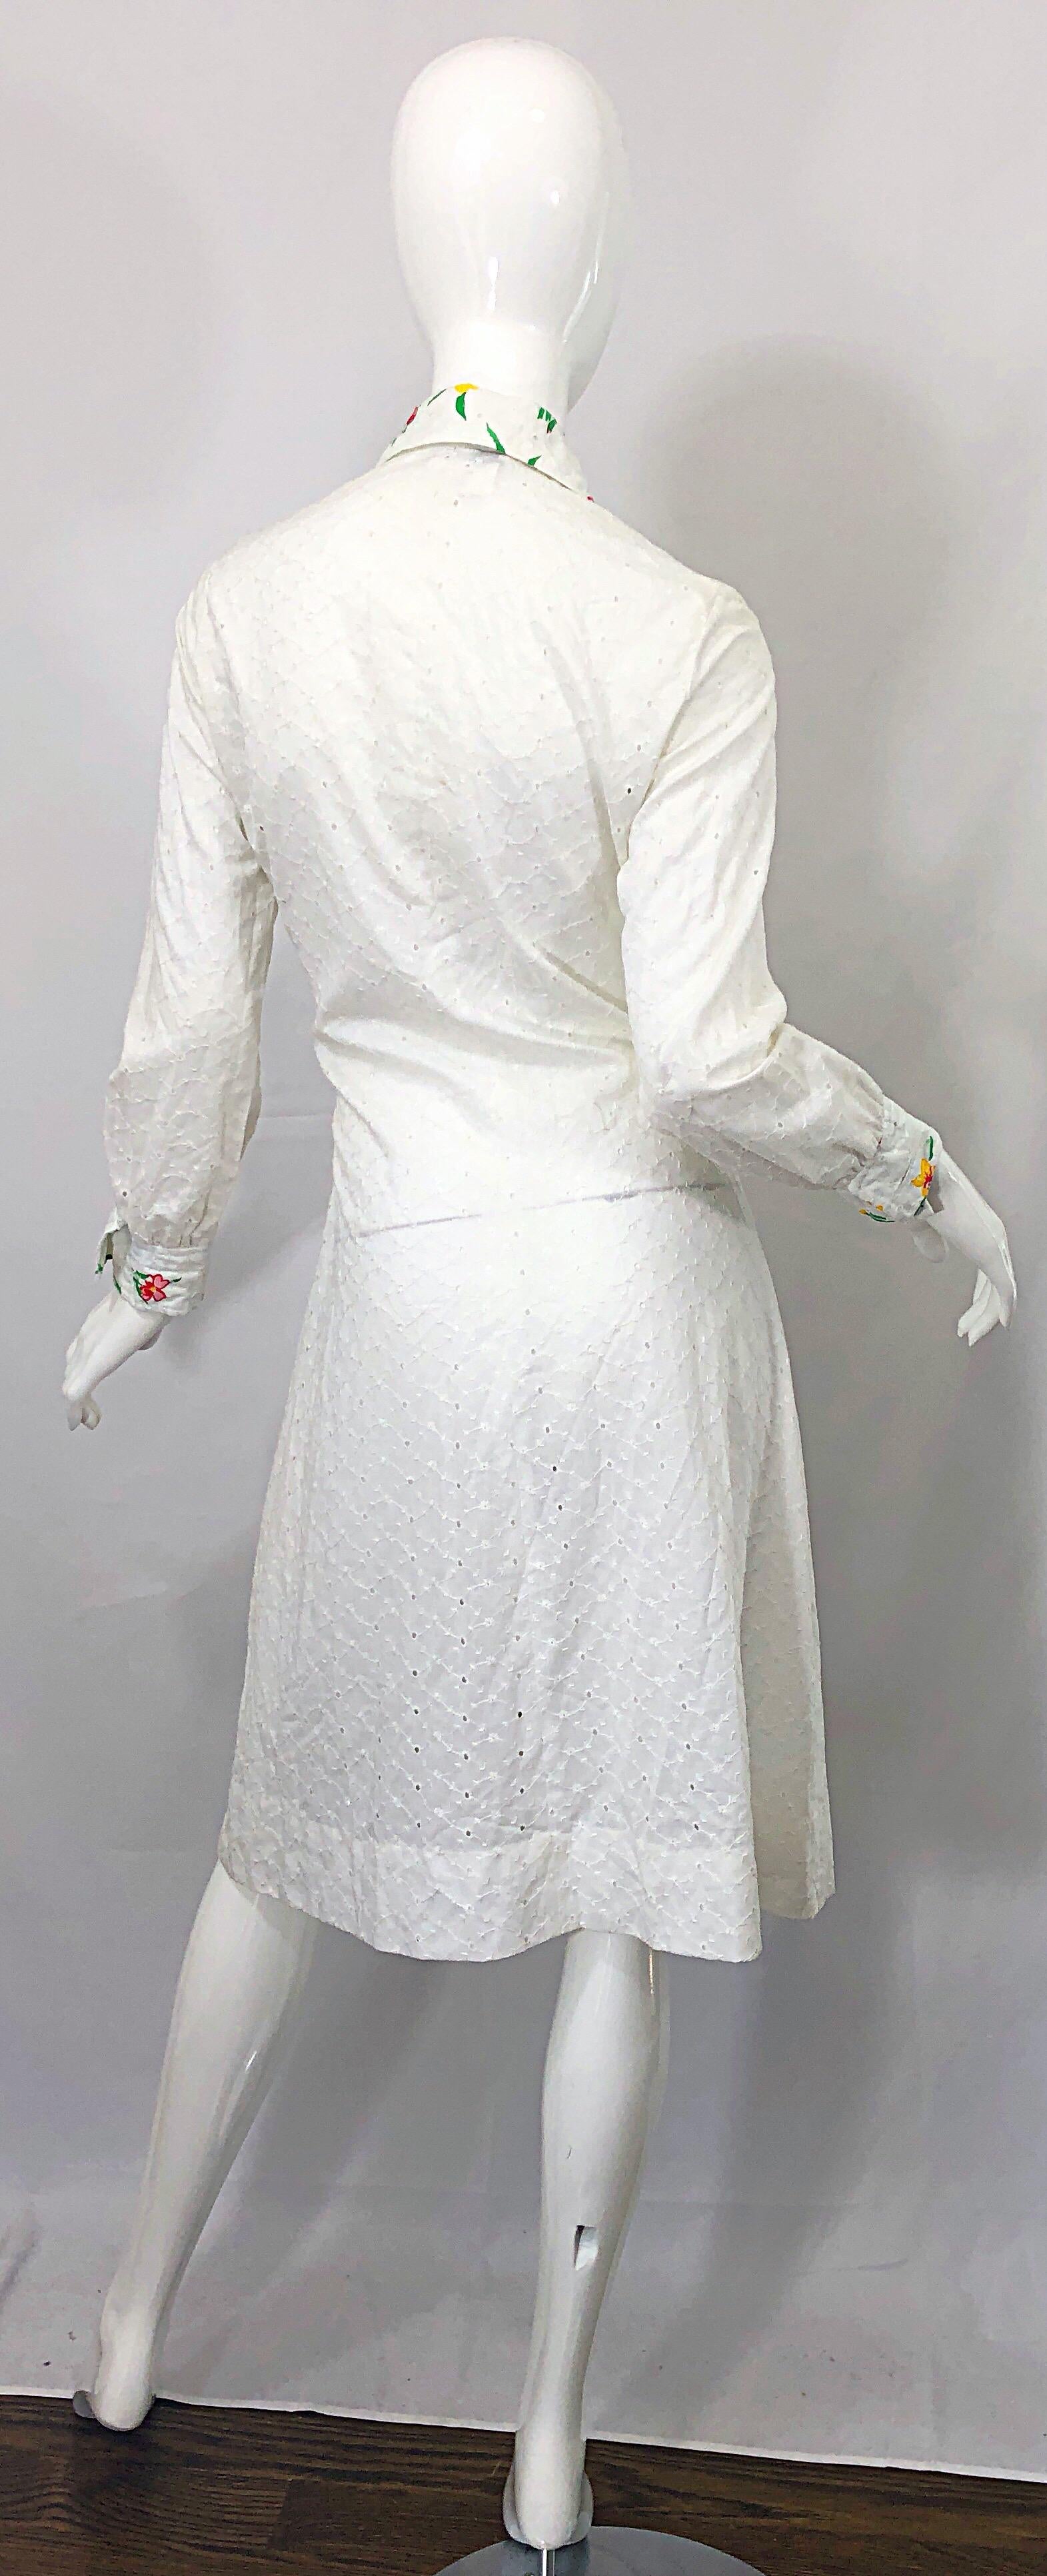 1970s Joseph Magnin White Eyelet Cotton Embrodiered Vintage 70s Shirt Dress In Excellent Condition For Sale In San Diego, CA